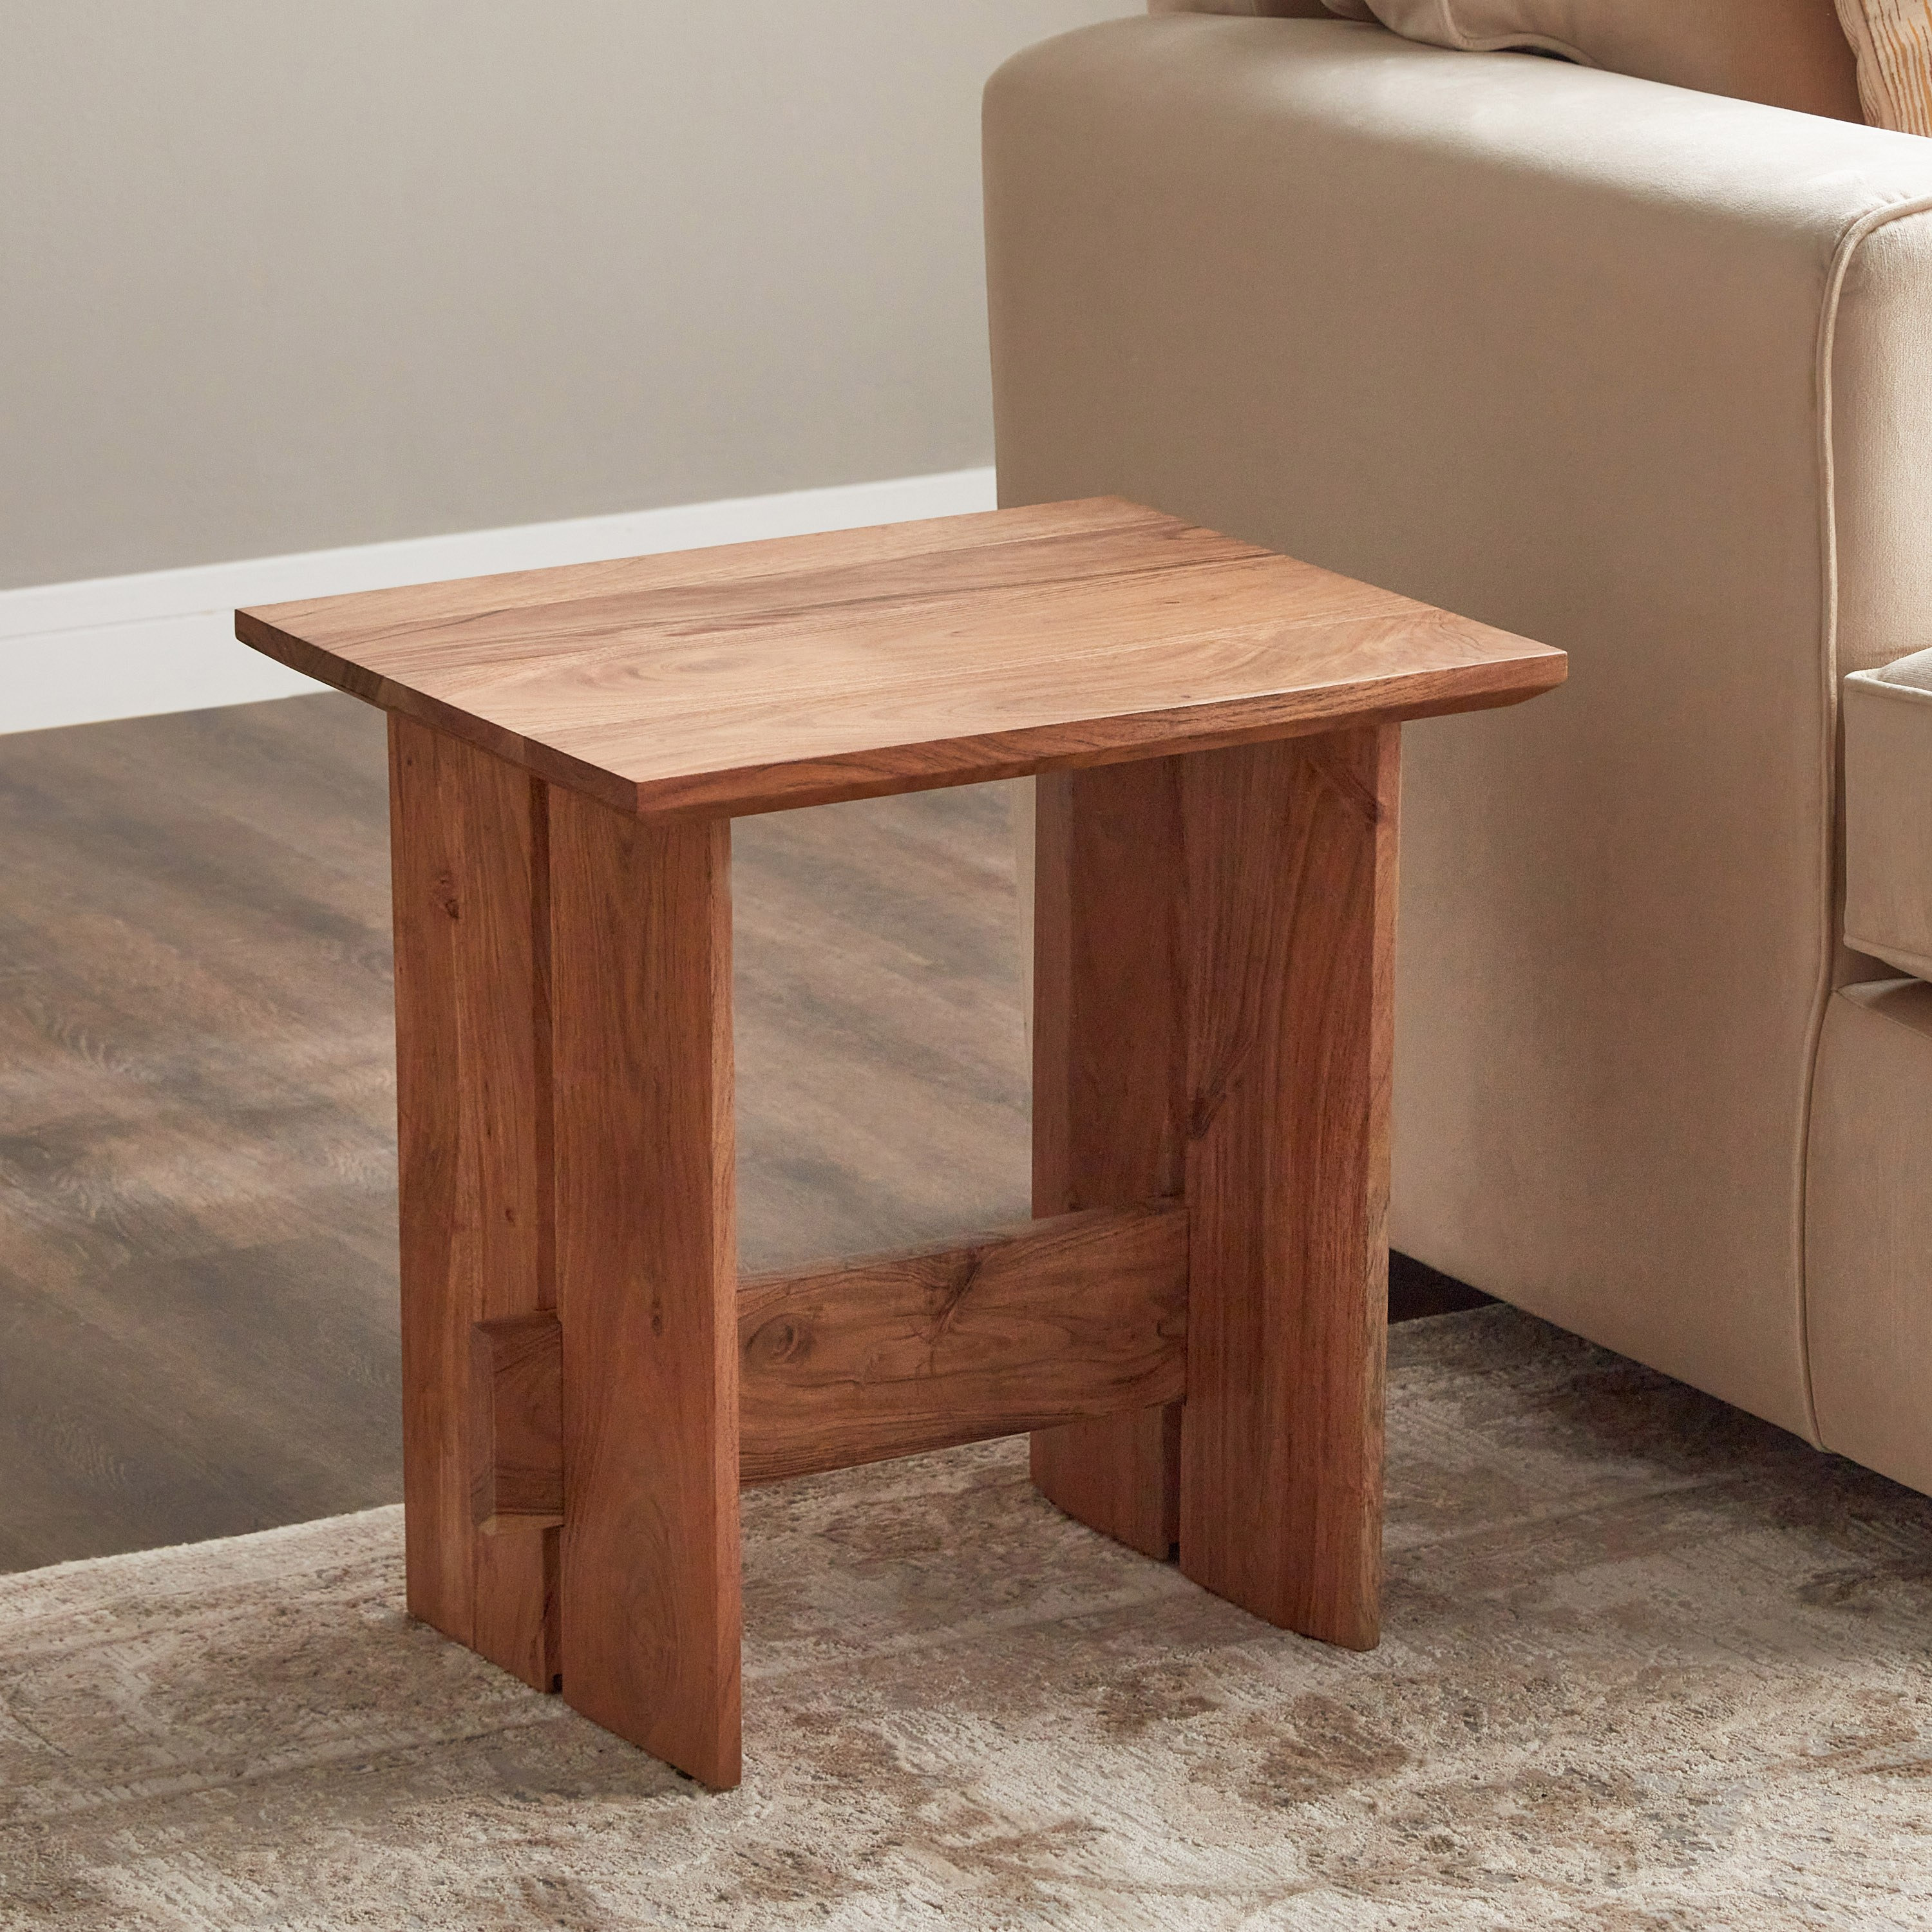 Shop Kyoto Wooden Top Coffee Table Online | Home Centre Kuwait